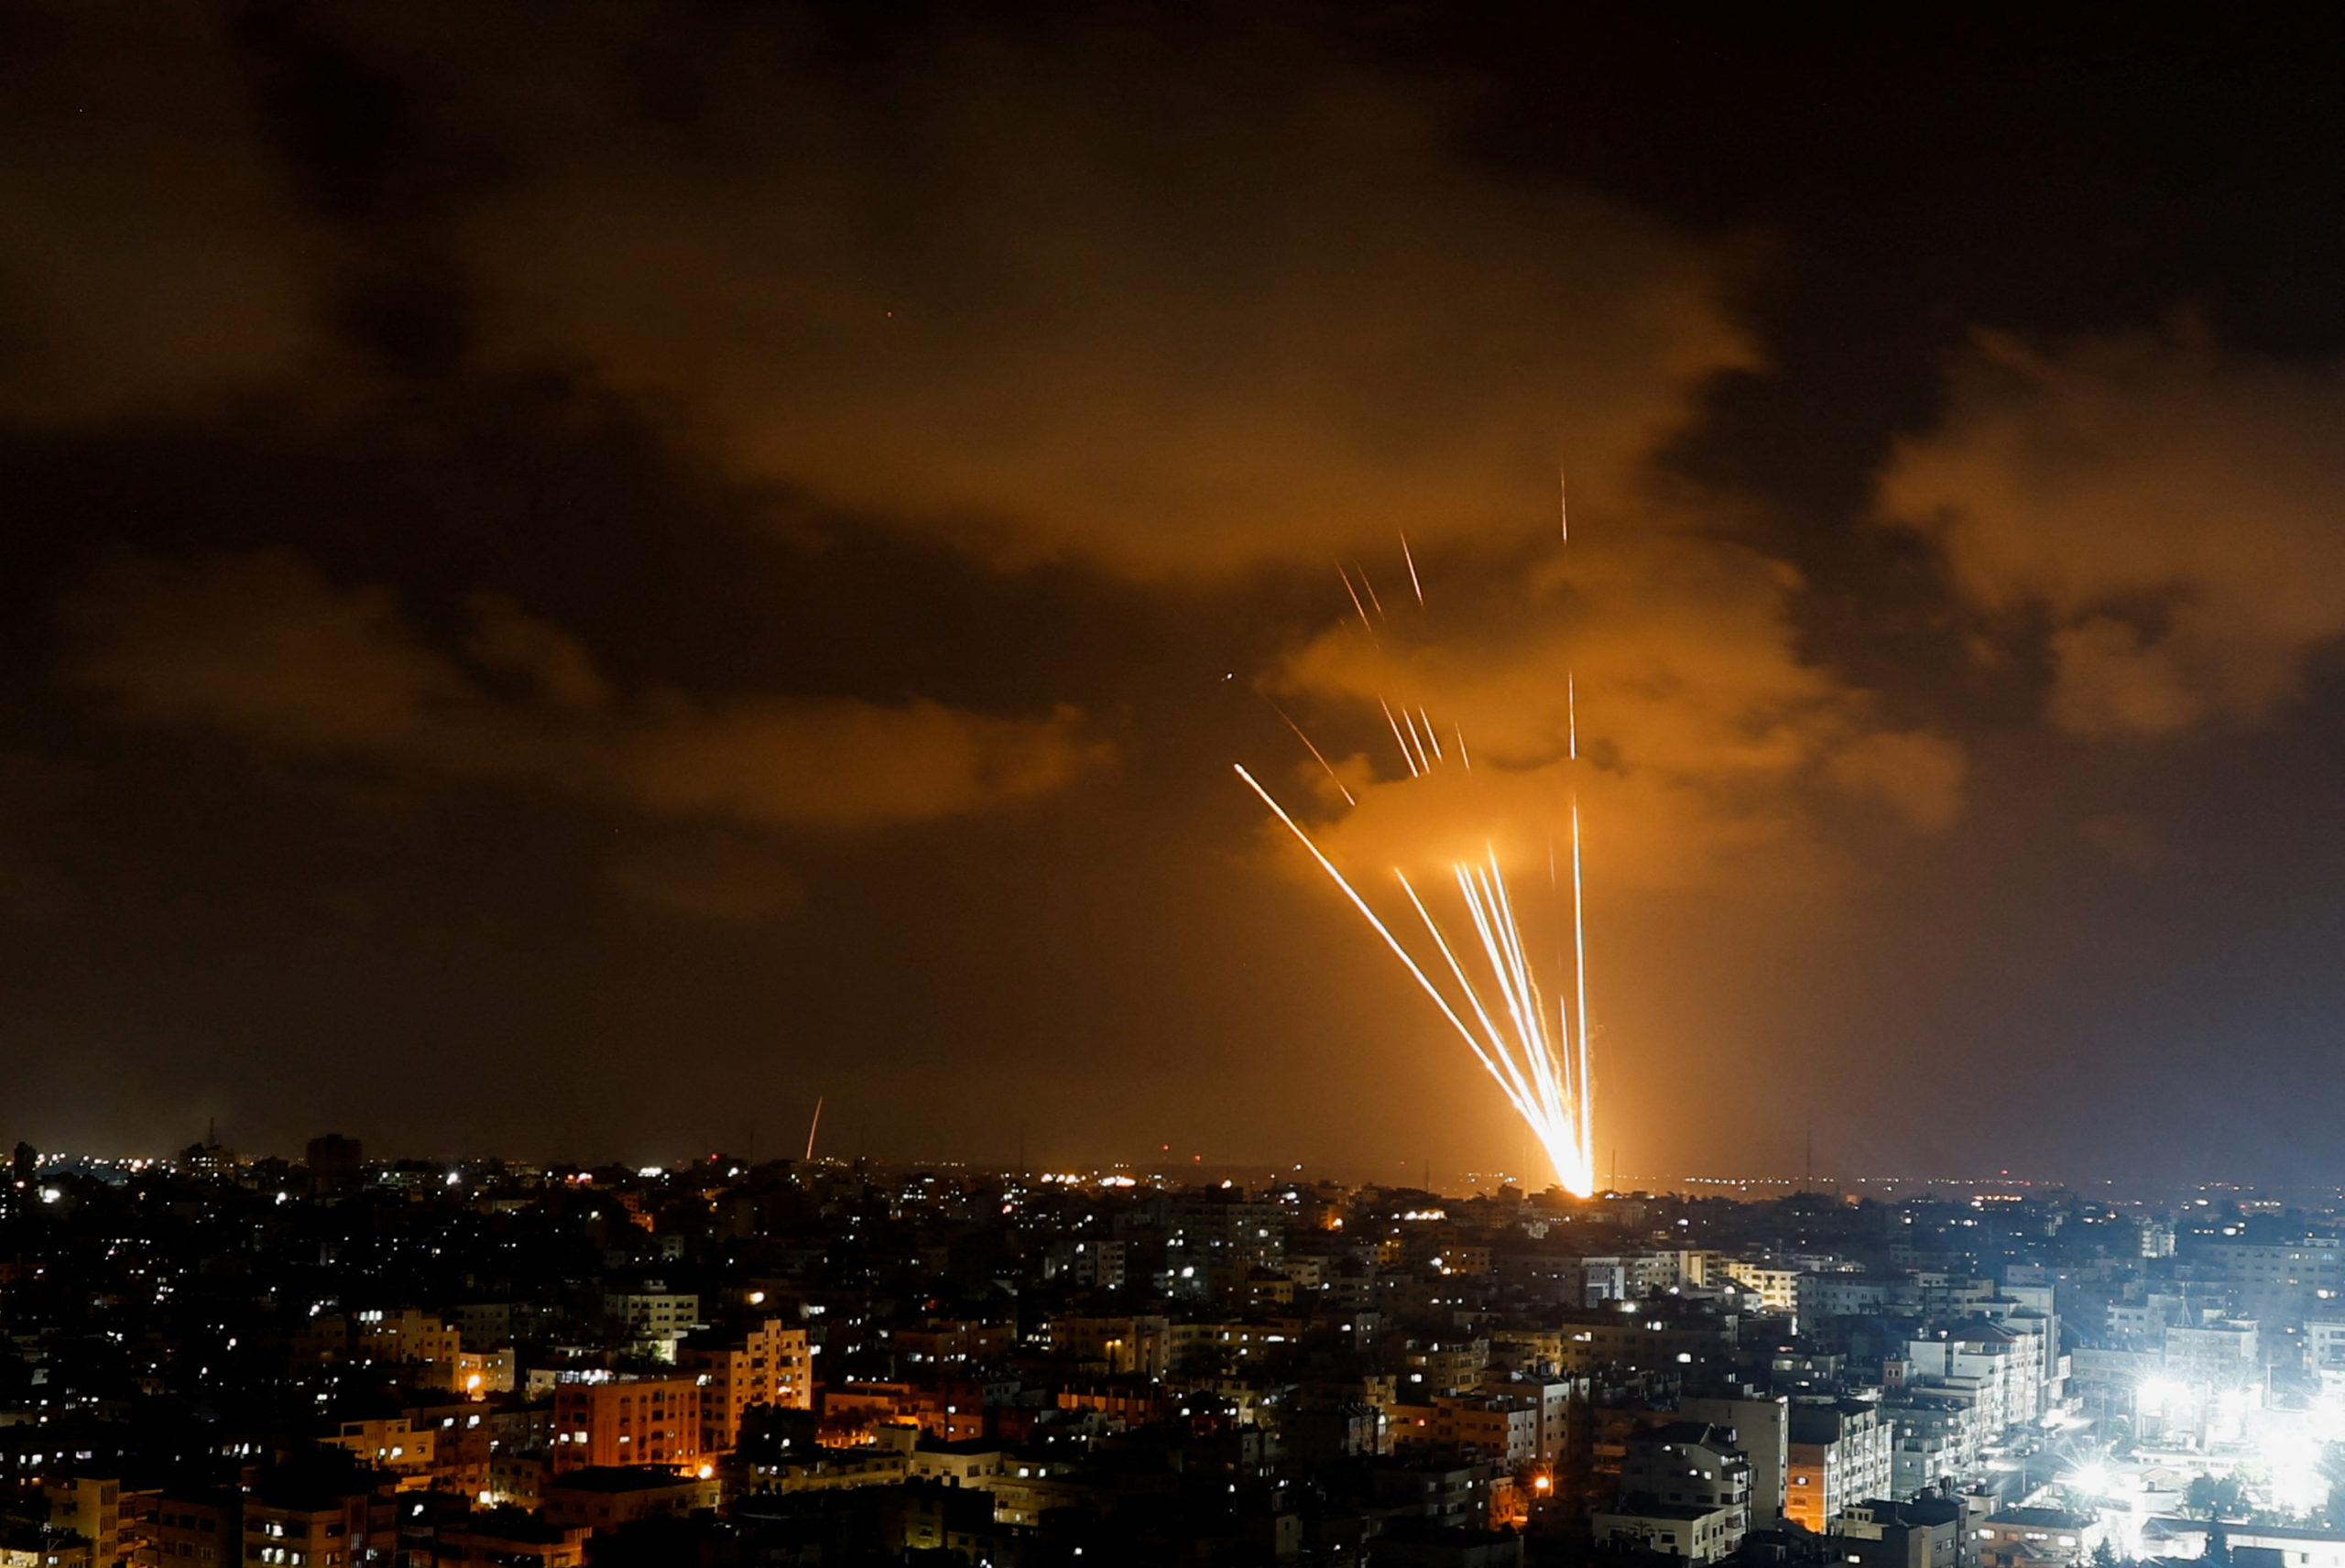 Alert Level 1 remains in Israel as hostilities are halting, the Department of Foreign Affairs (DFA) said on Monday.